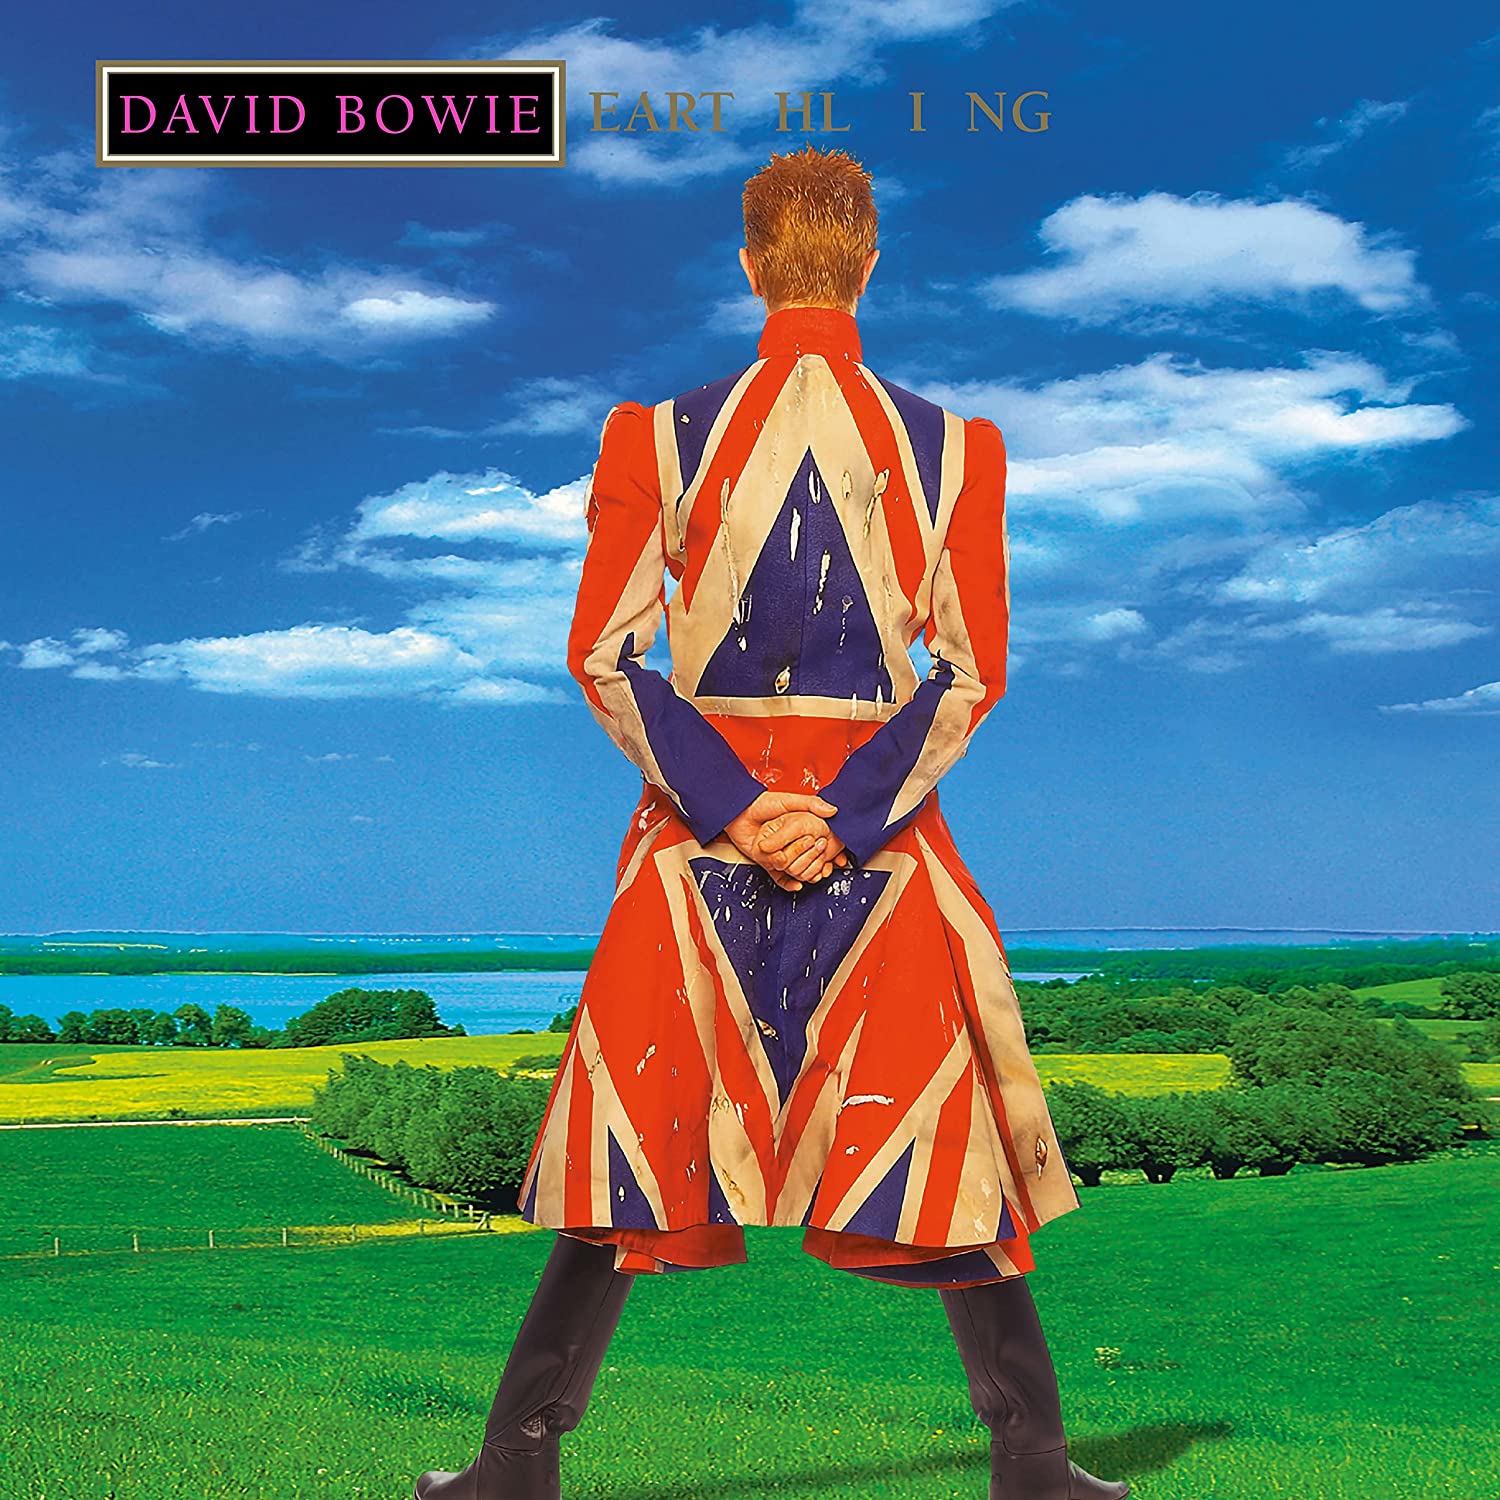 Earthling | David Bowie image4